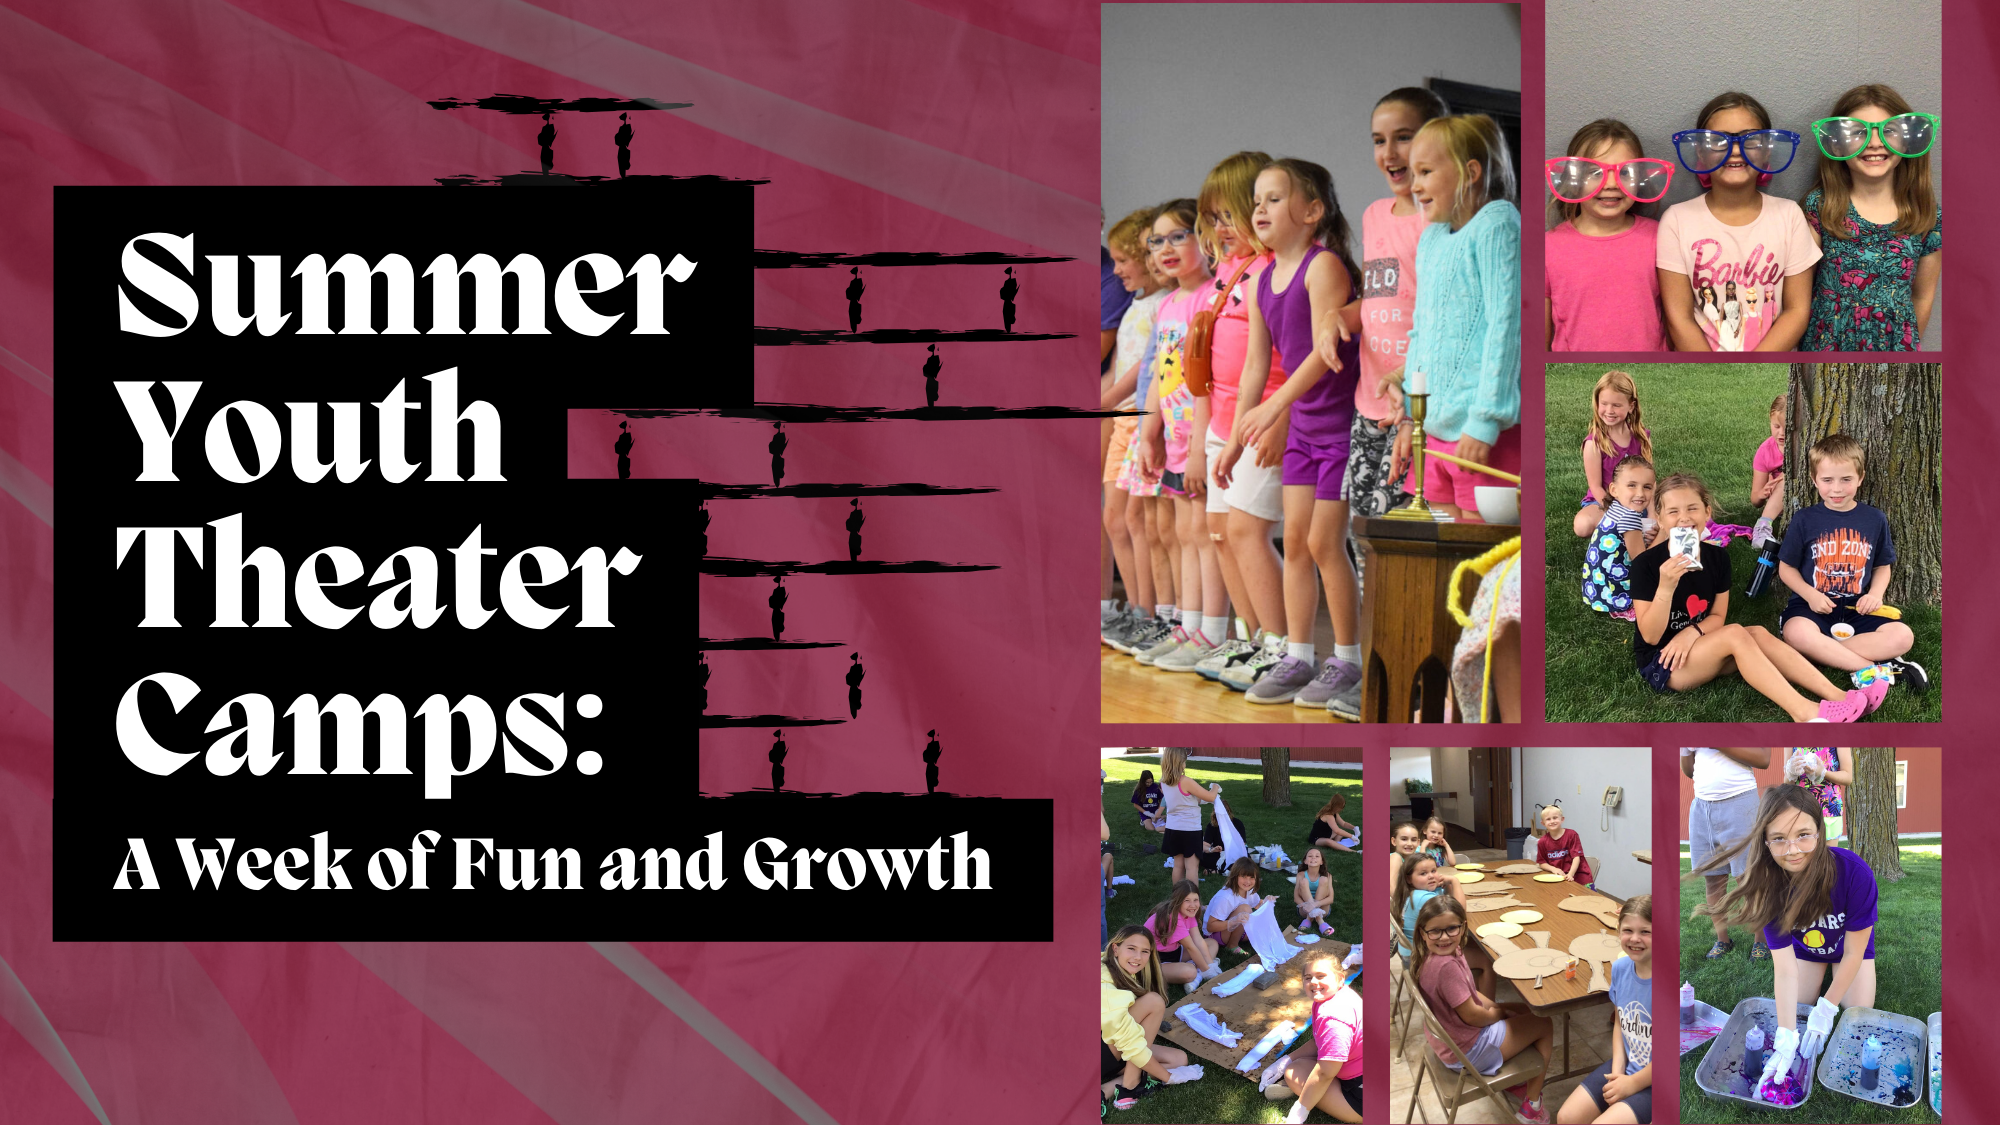 Summer Youth Theater Camps: A Week of Fun and Growth